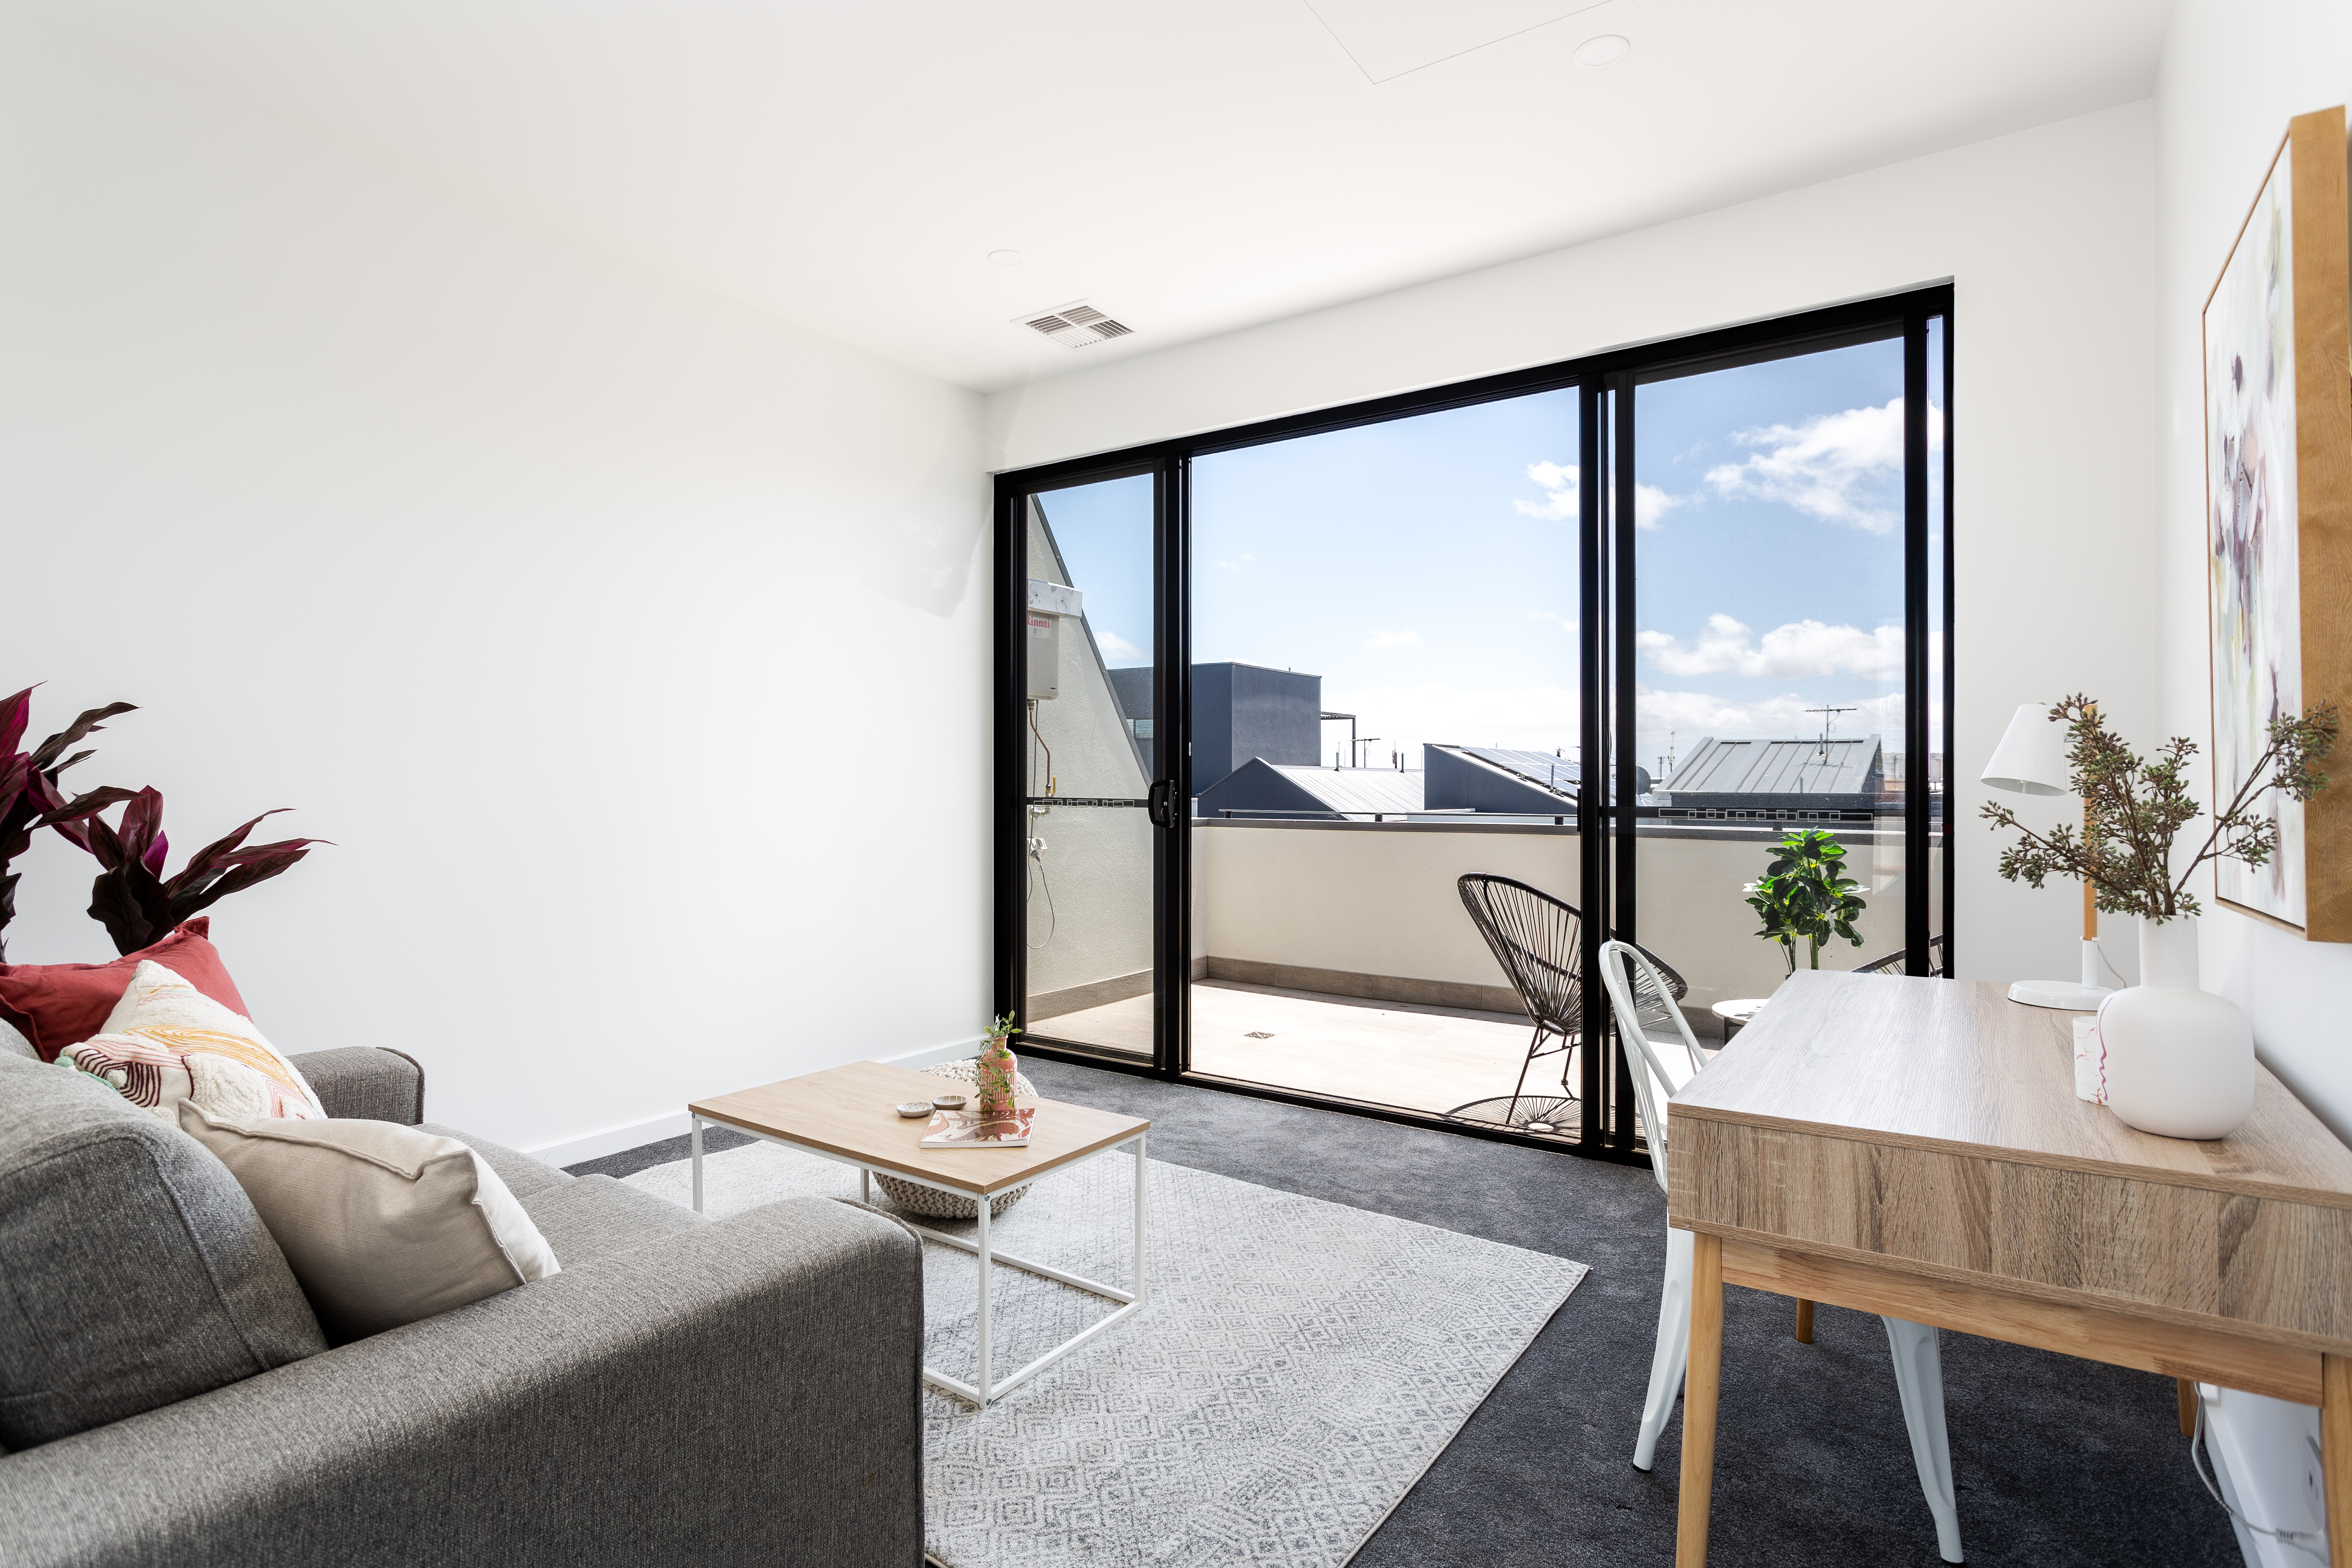 Desk - Two Bedroom Apartment - Urban Rest - Albany Lane Apartments - Adelaide